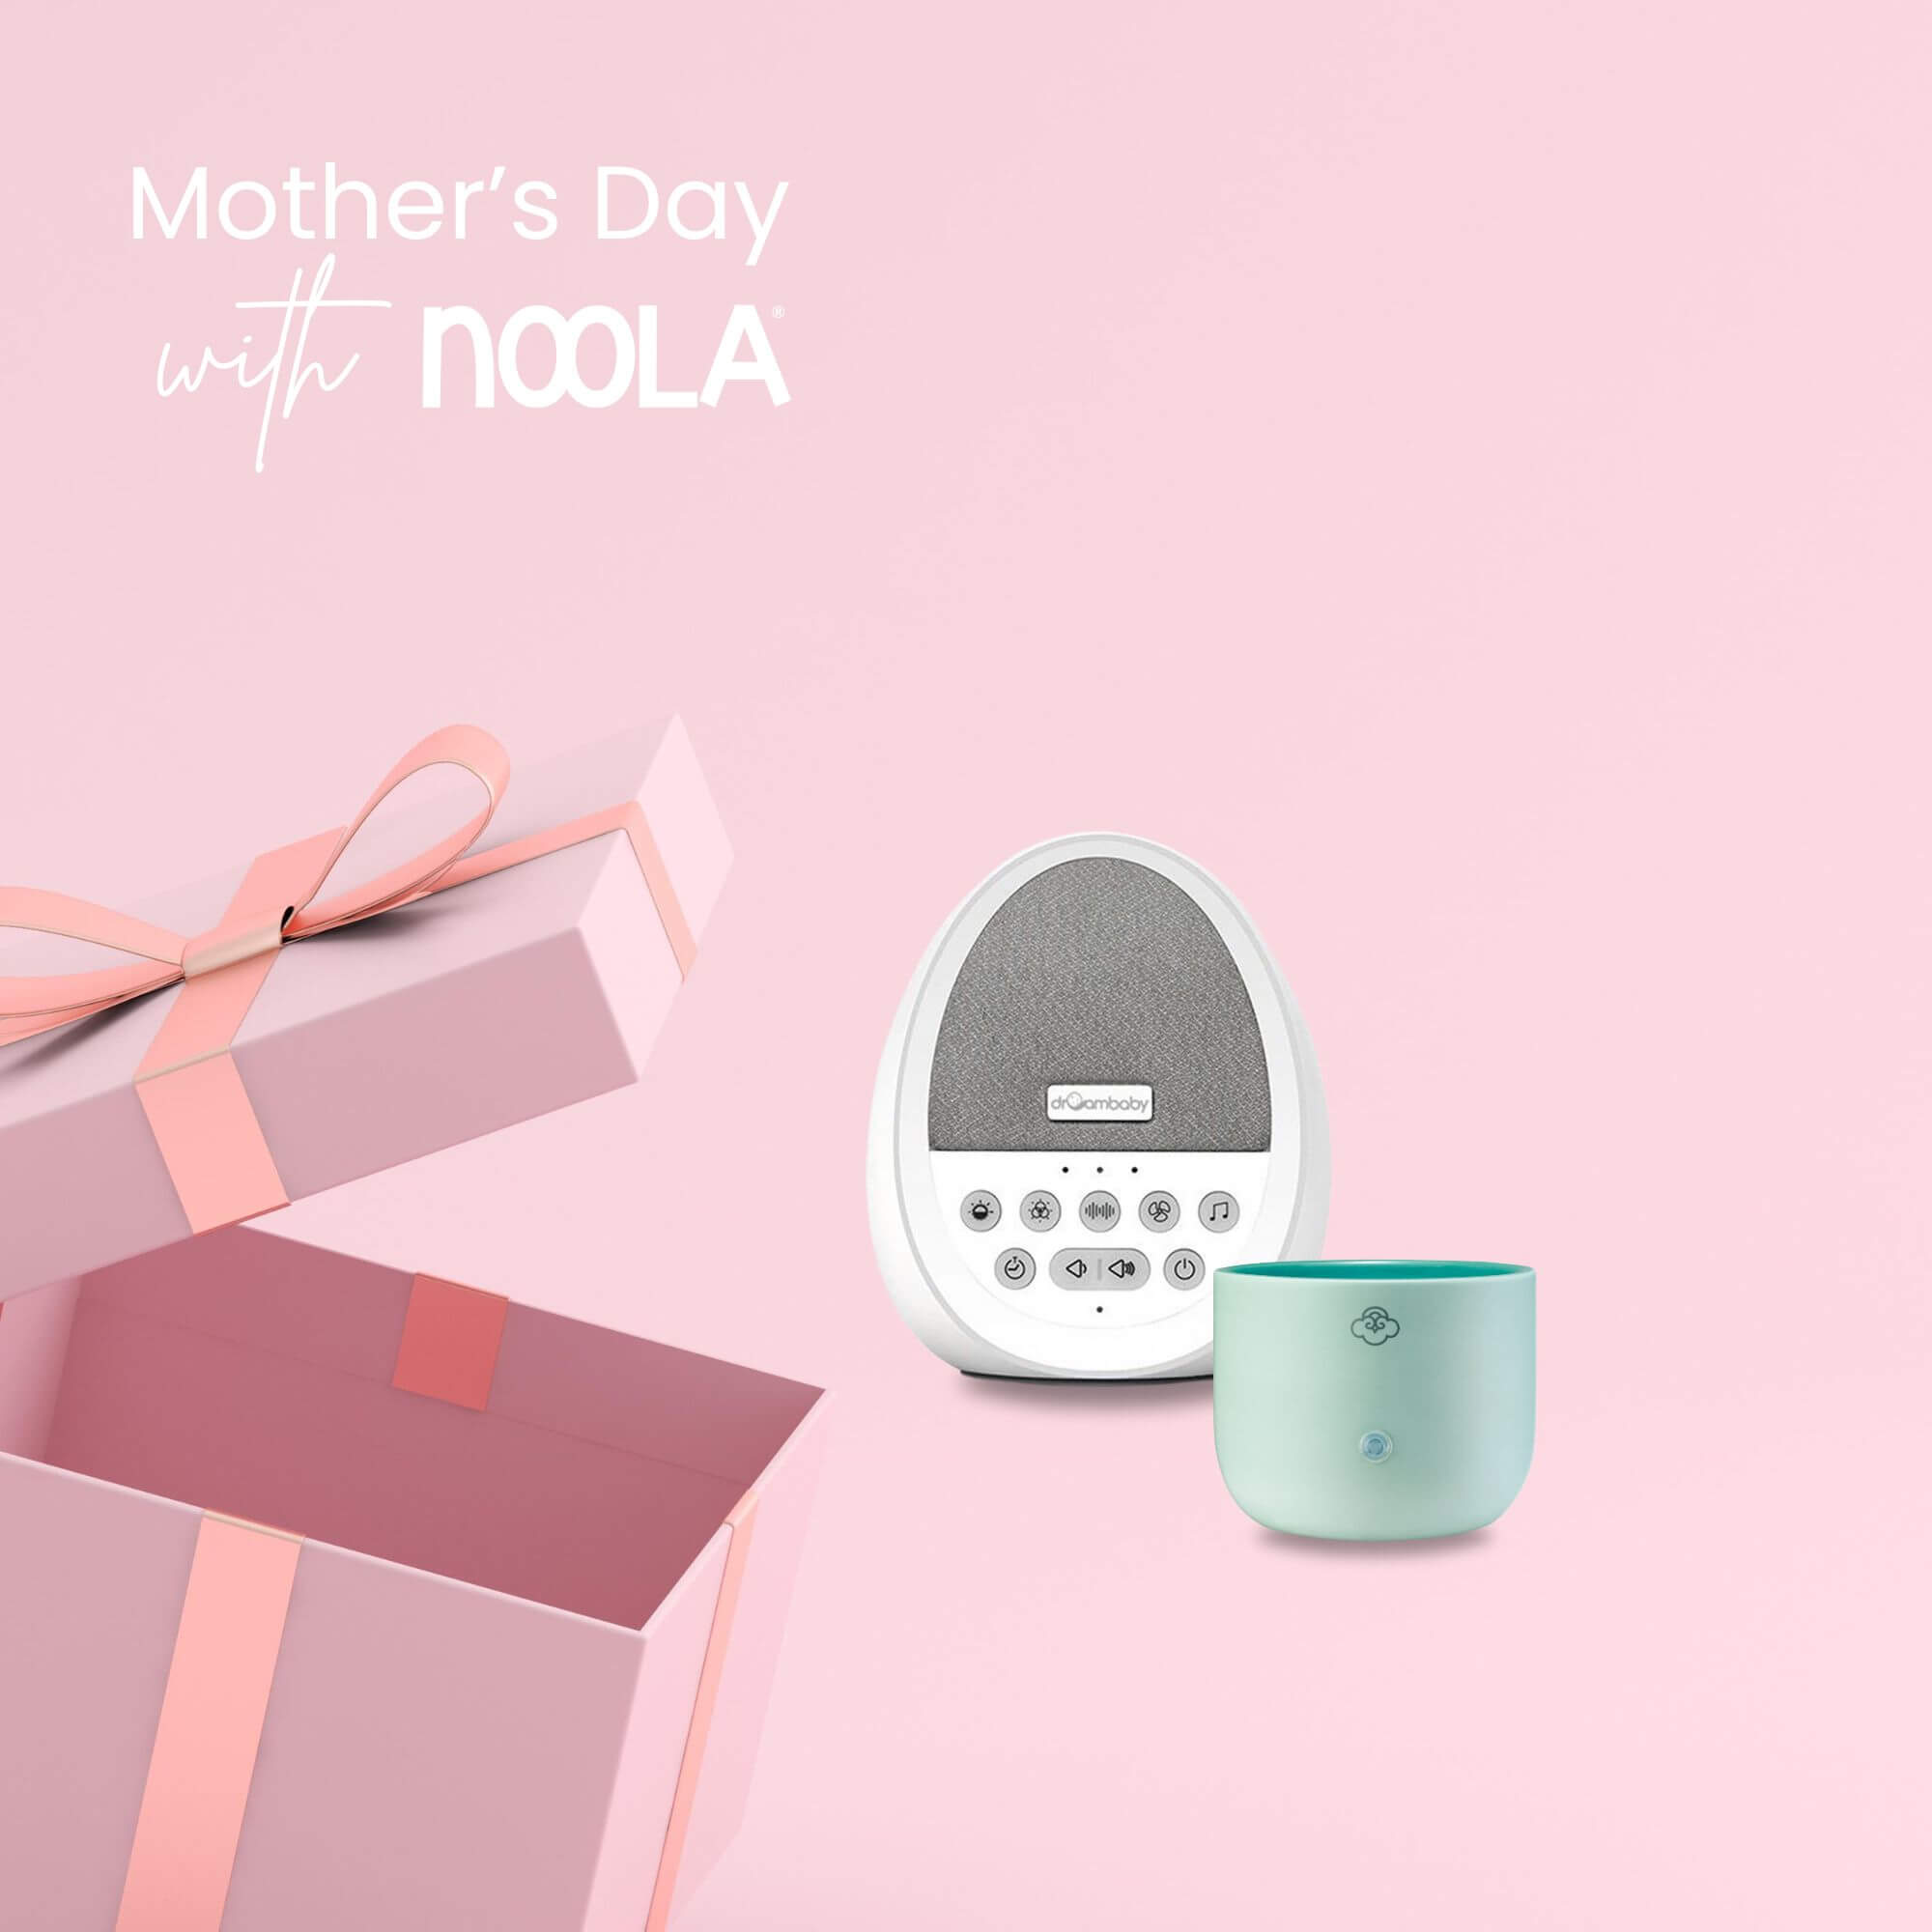 noola mothersday gift box bundle dreambaby white noise machine baby soother and serene aromatic fragrance diffuser green